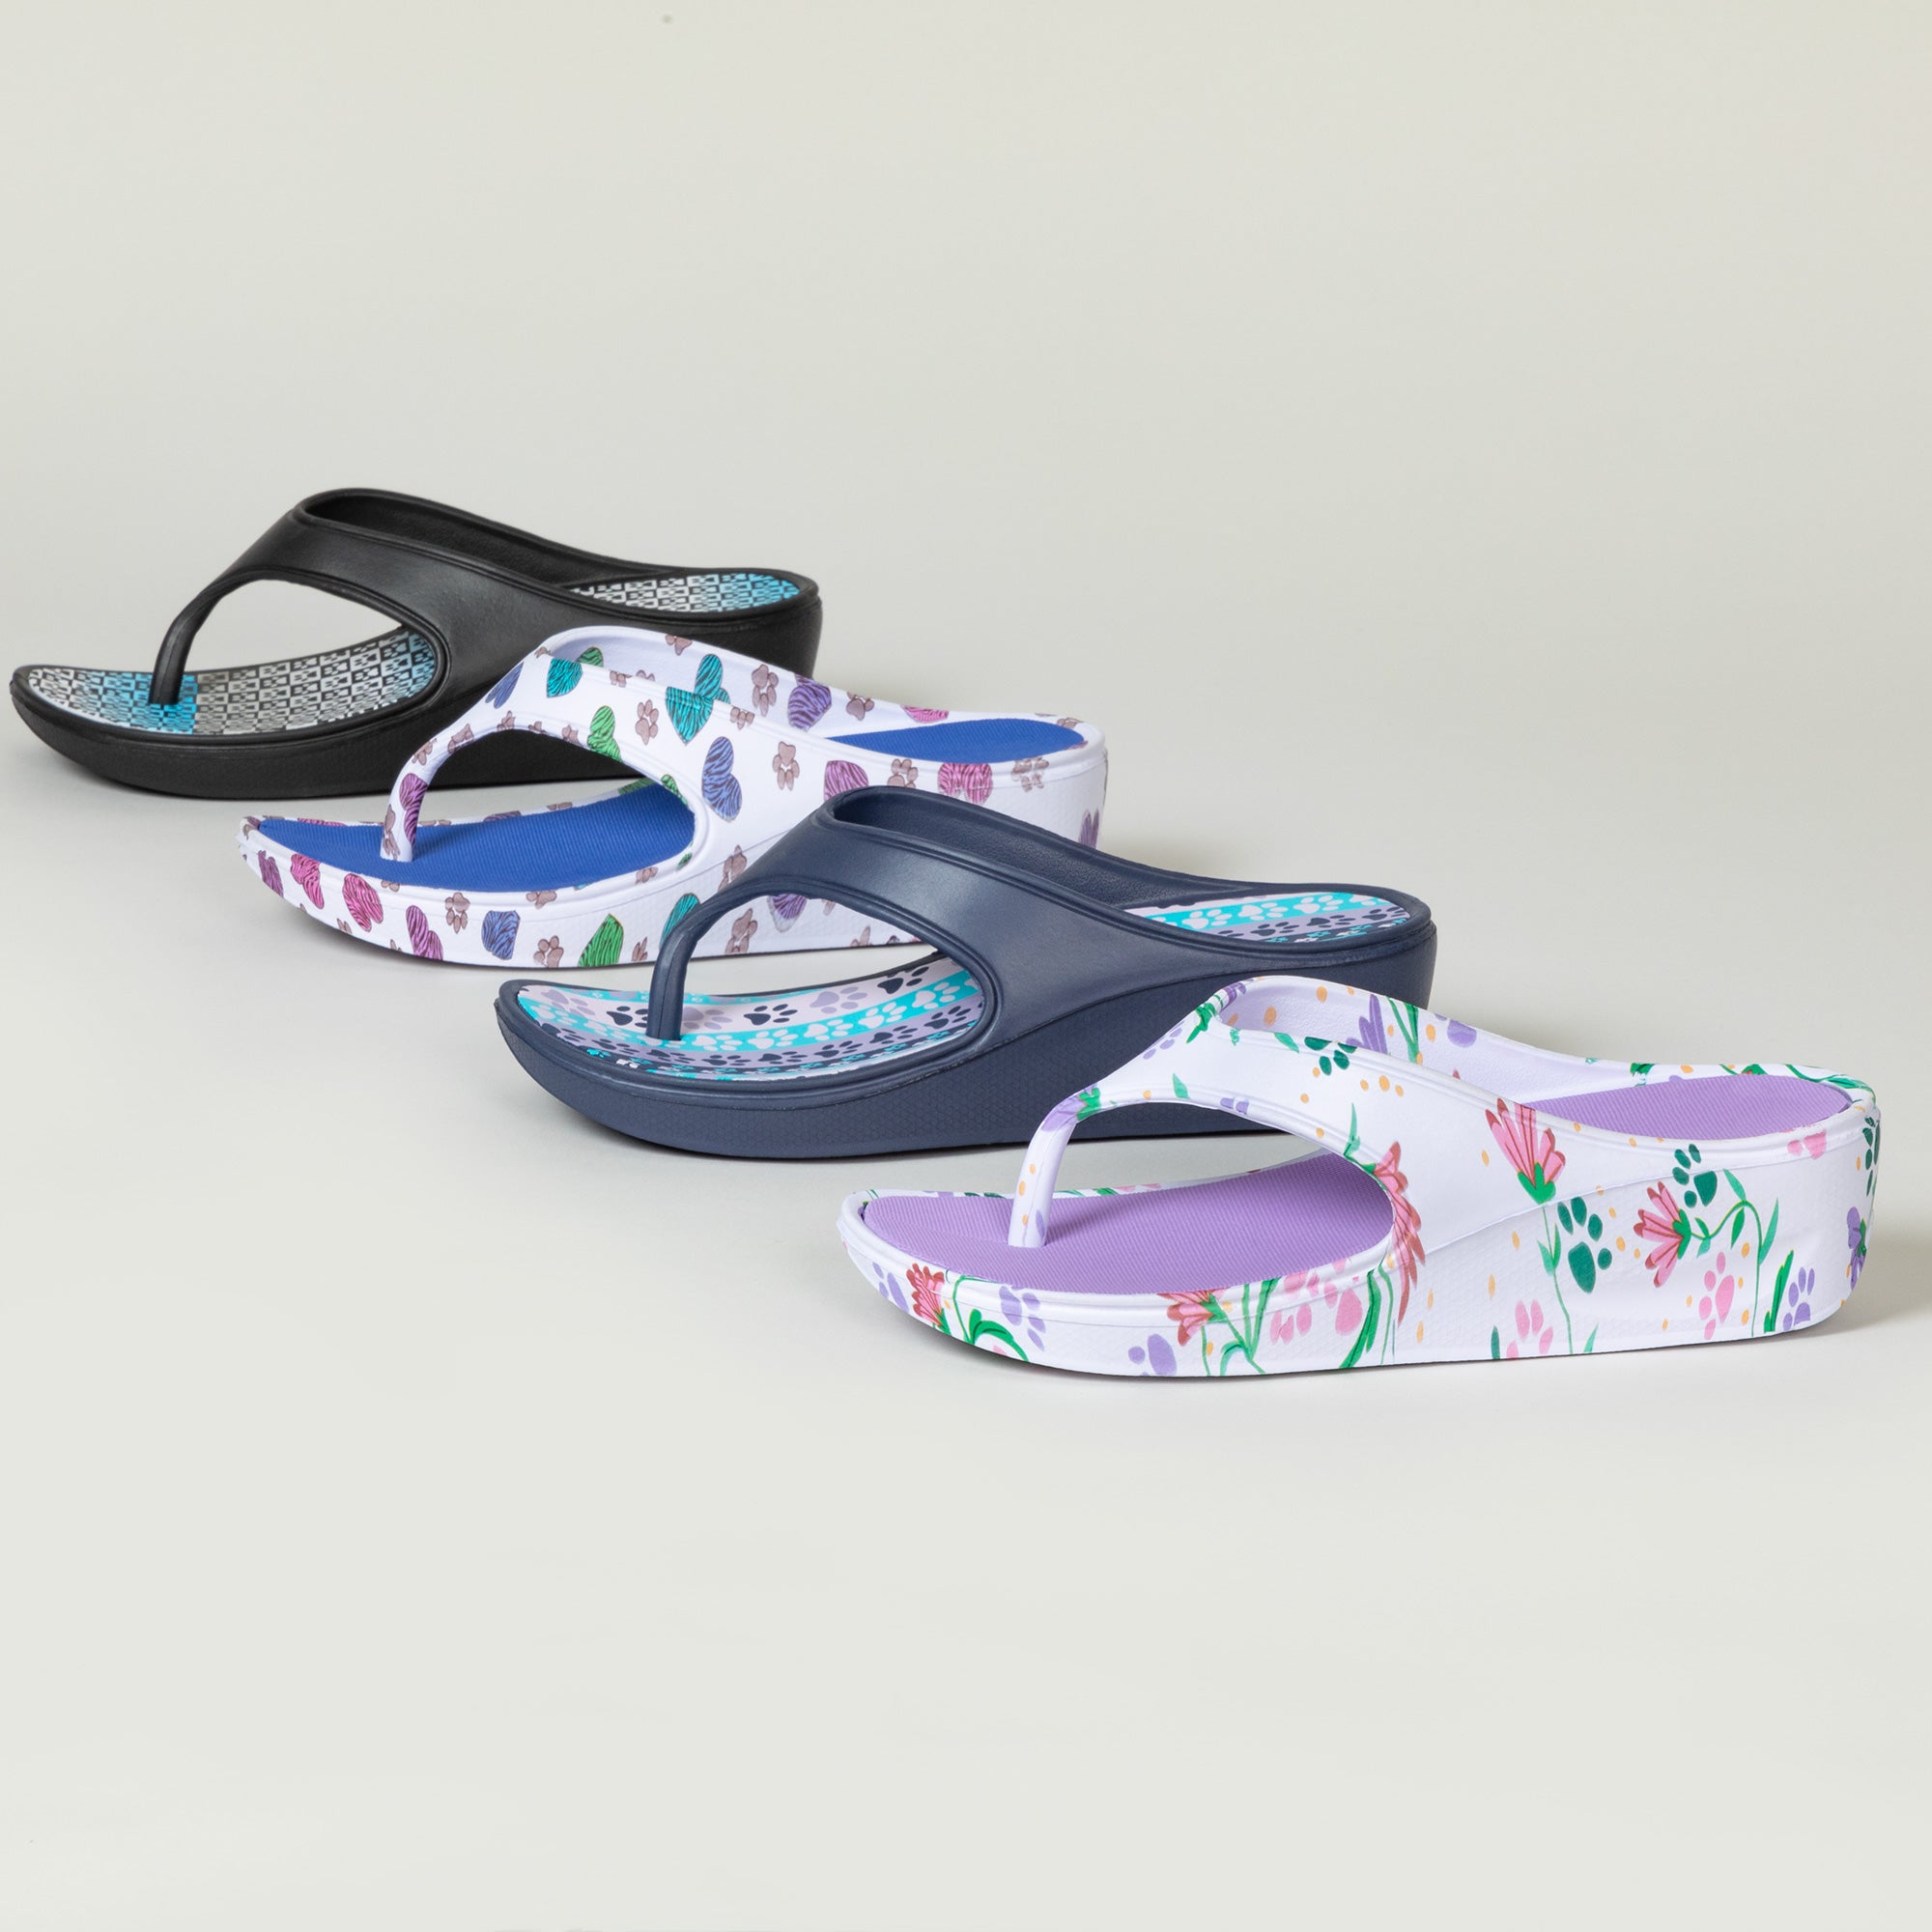 Paw Print Wedge Flip Flops - Checkered Paws - 6